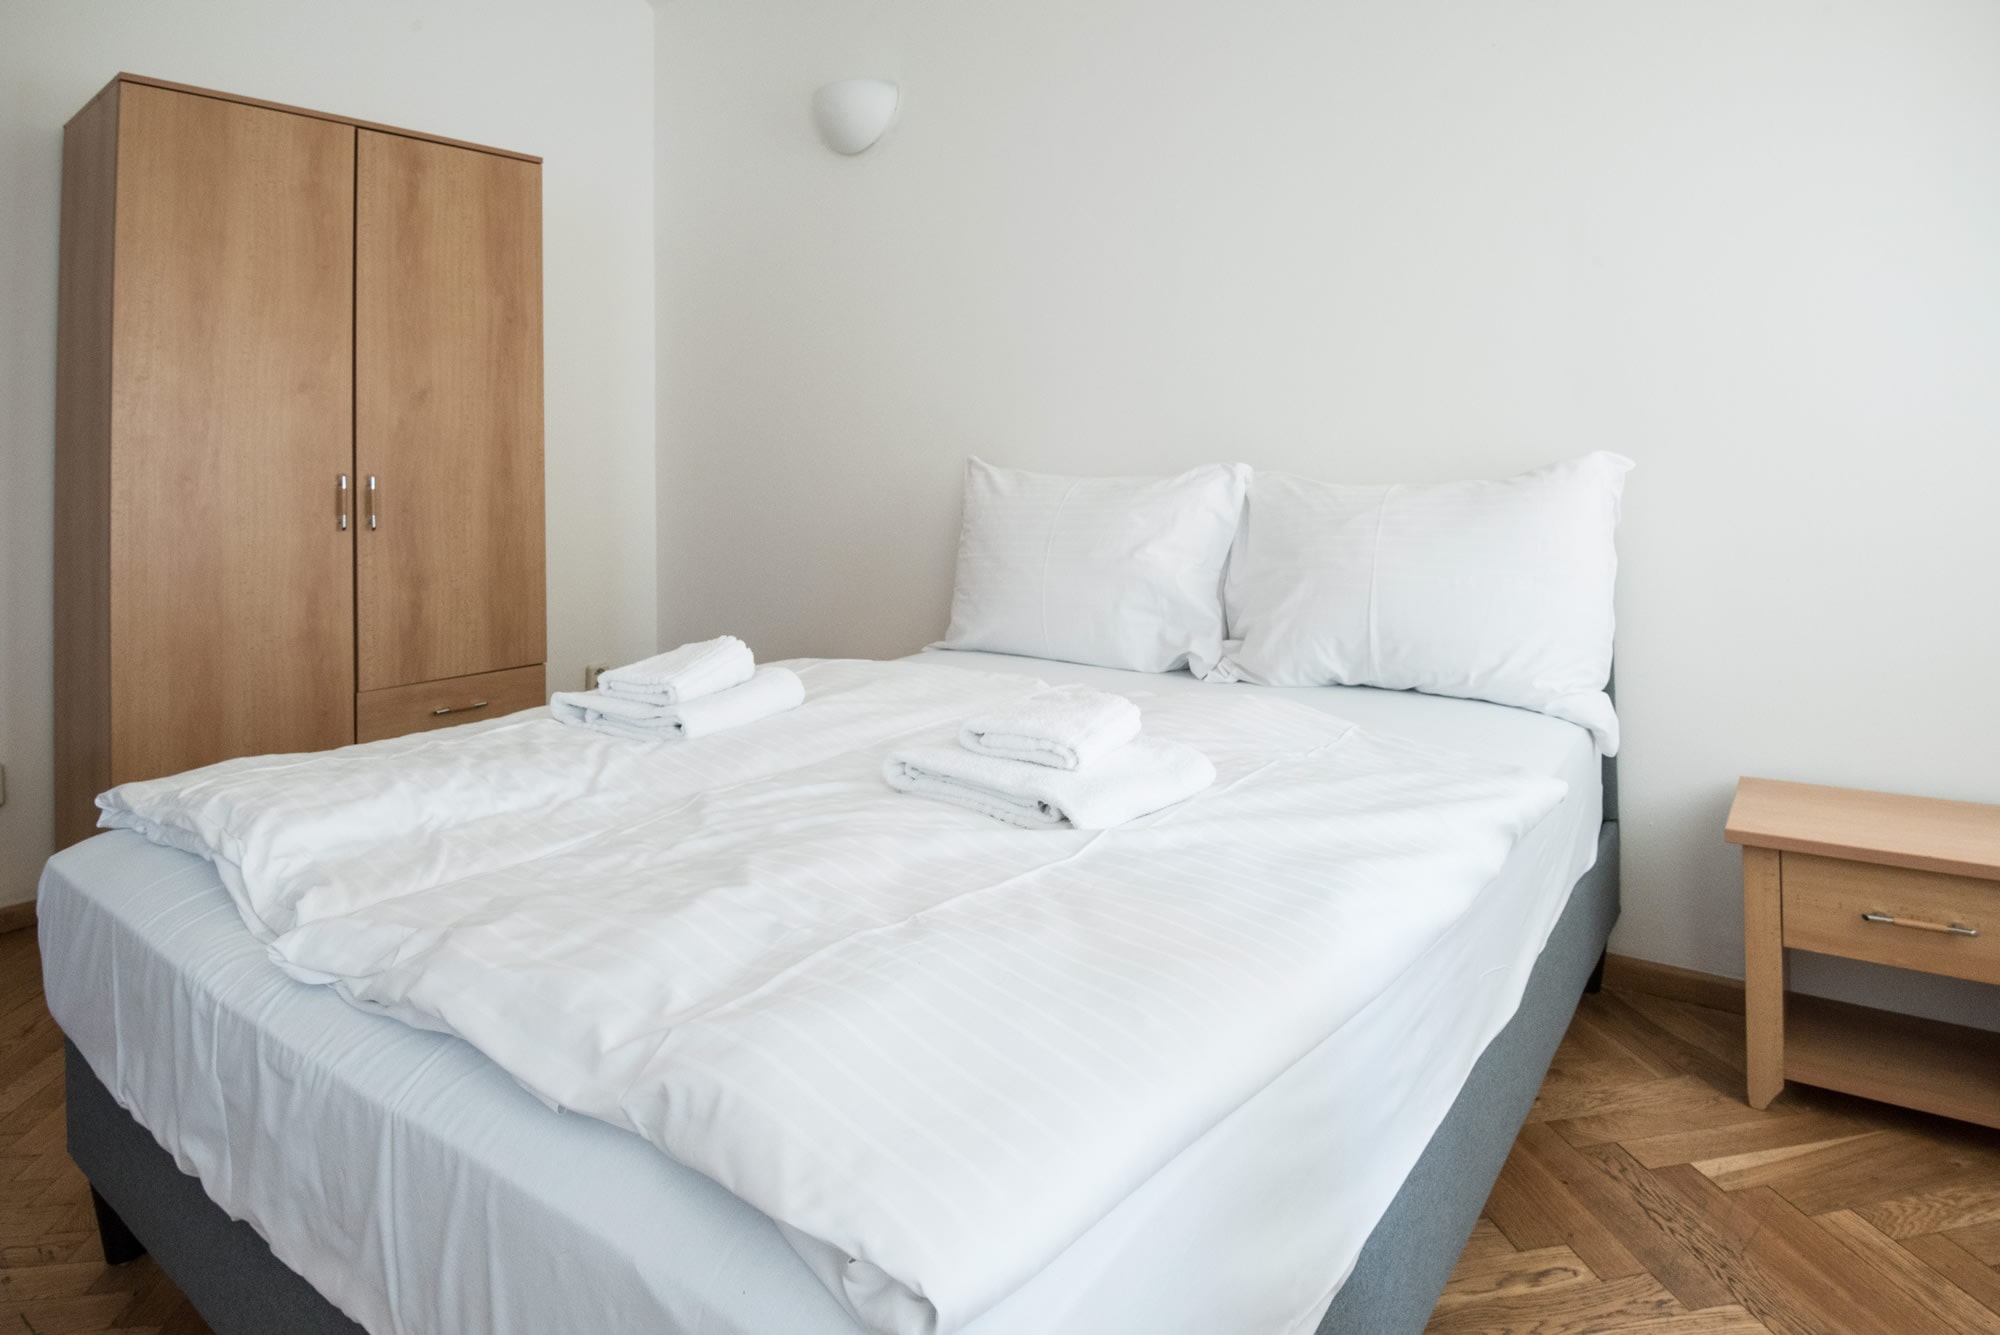 Double bed with white bed sheets in a bright apartment studio